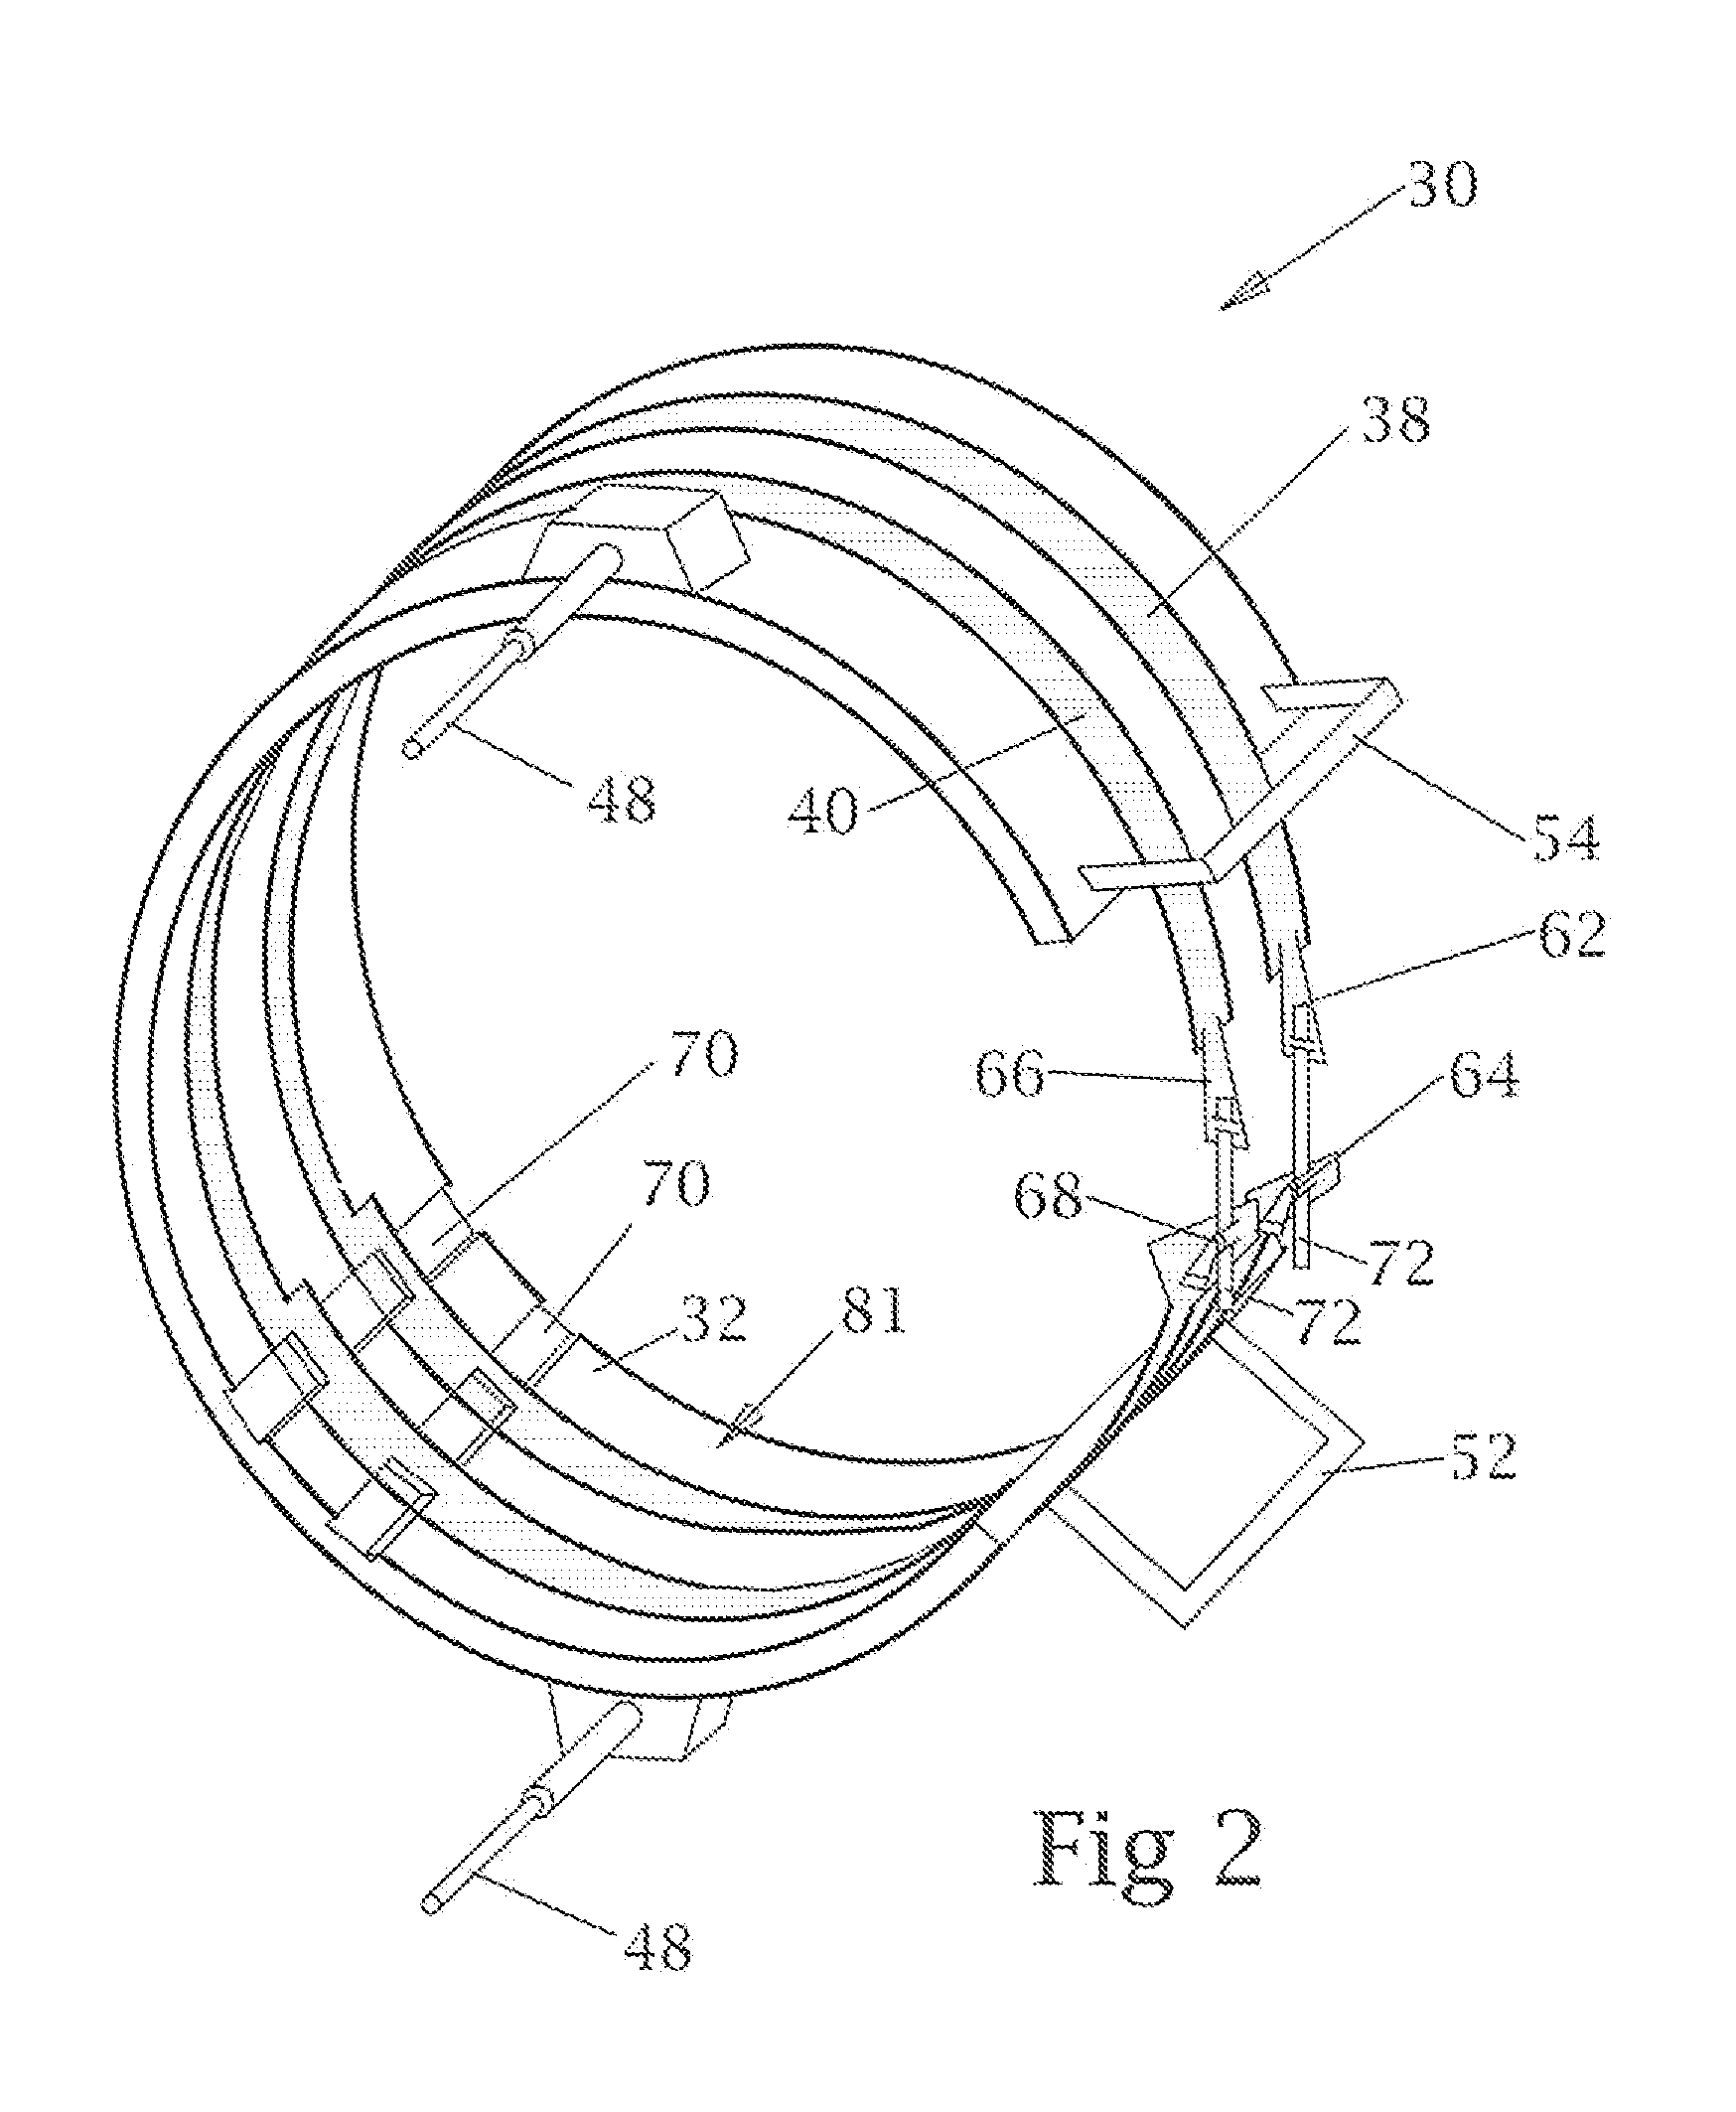 Apparatus and Method for Measuring Mechanical Properties of Tendons in Tension Leg Platforms